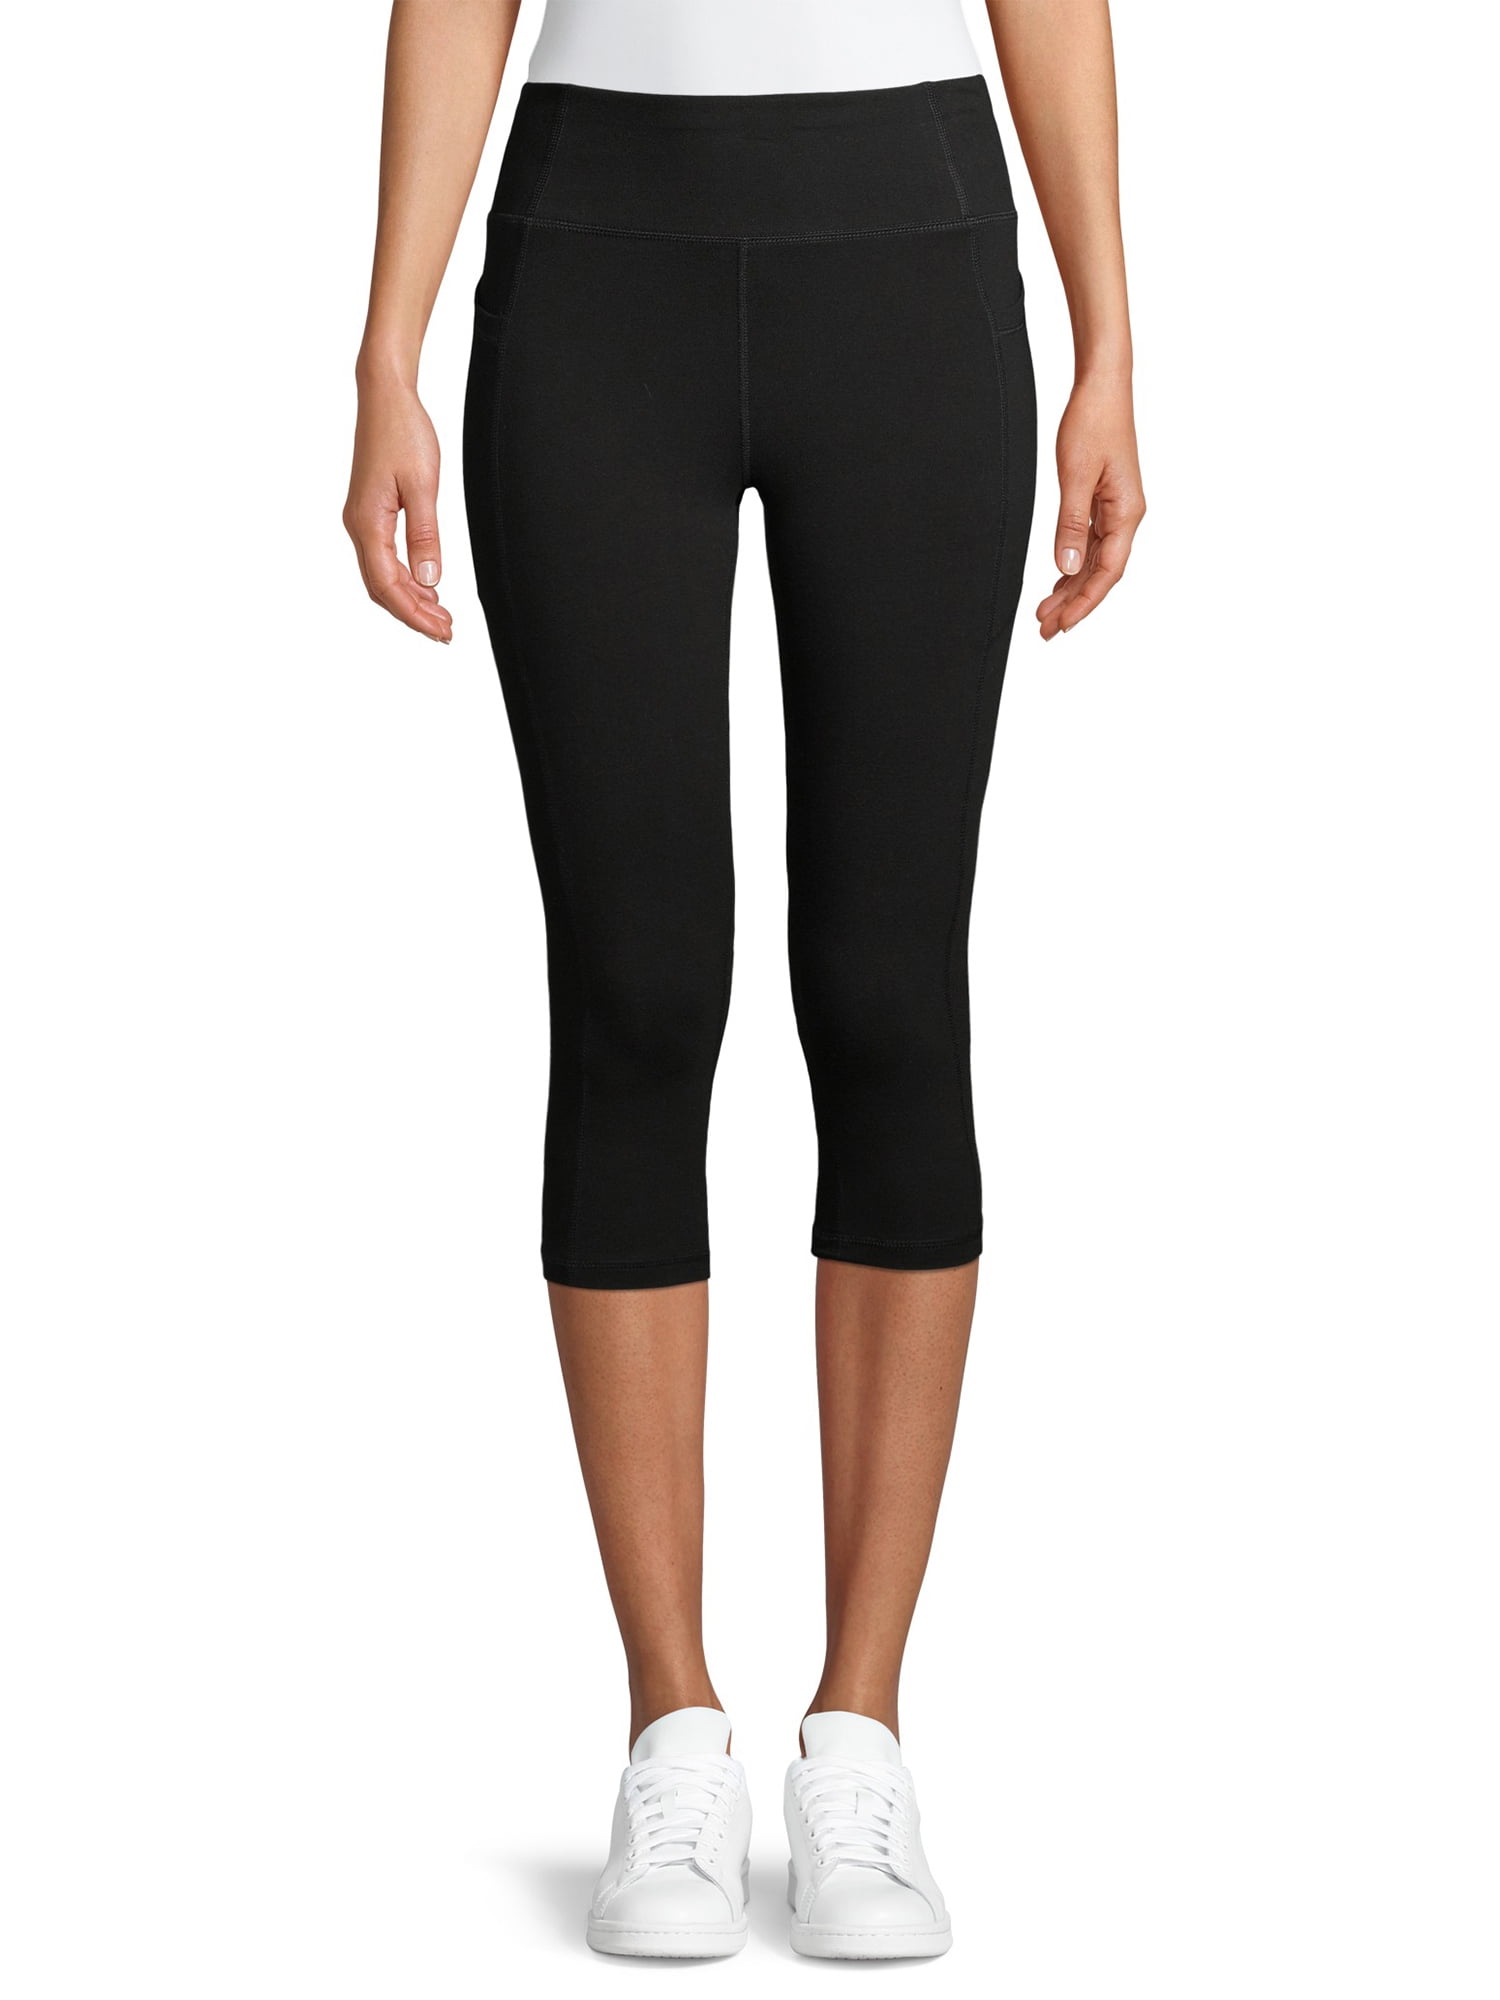 Athletic Works Womens Capris with Side Pockets Jordan